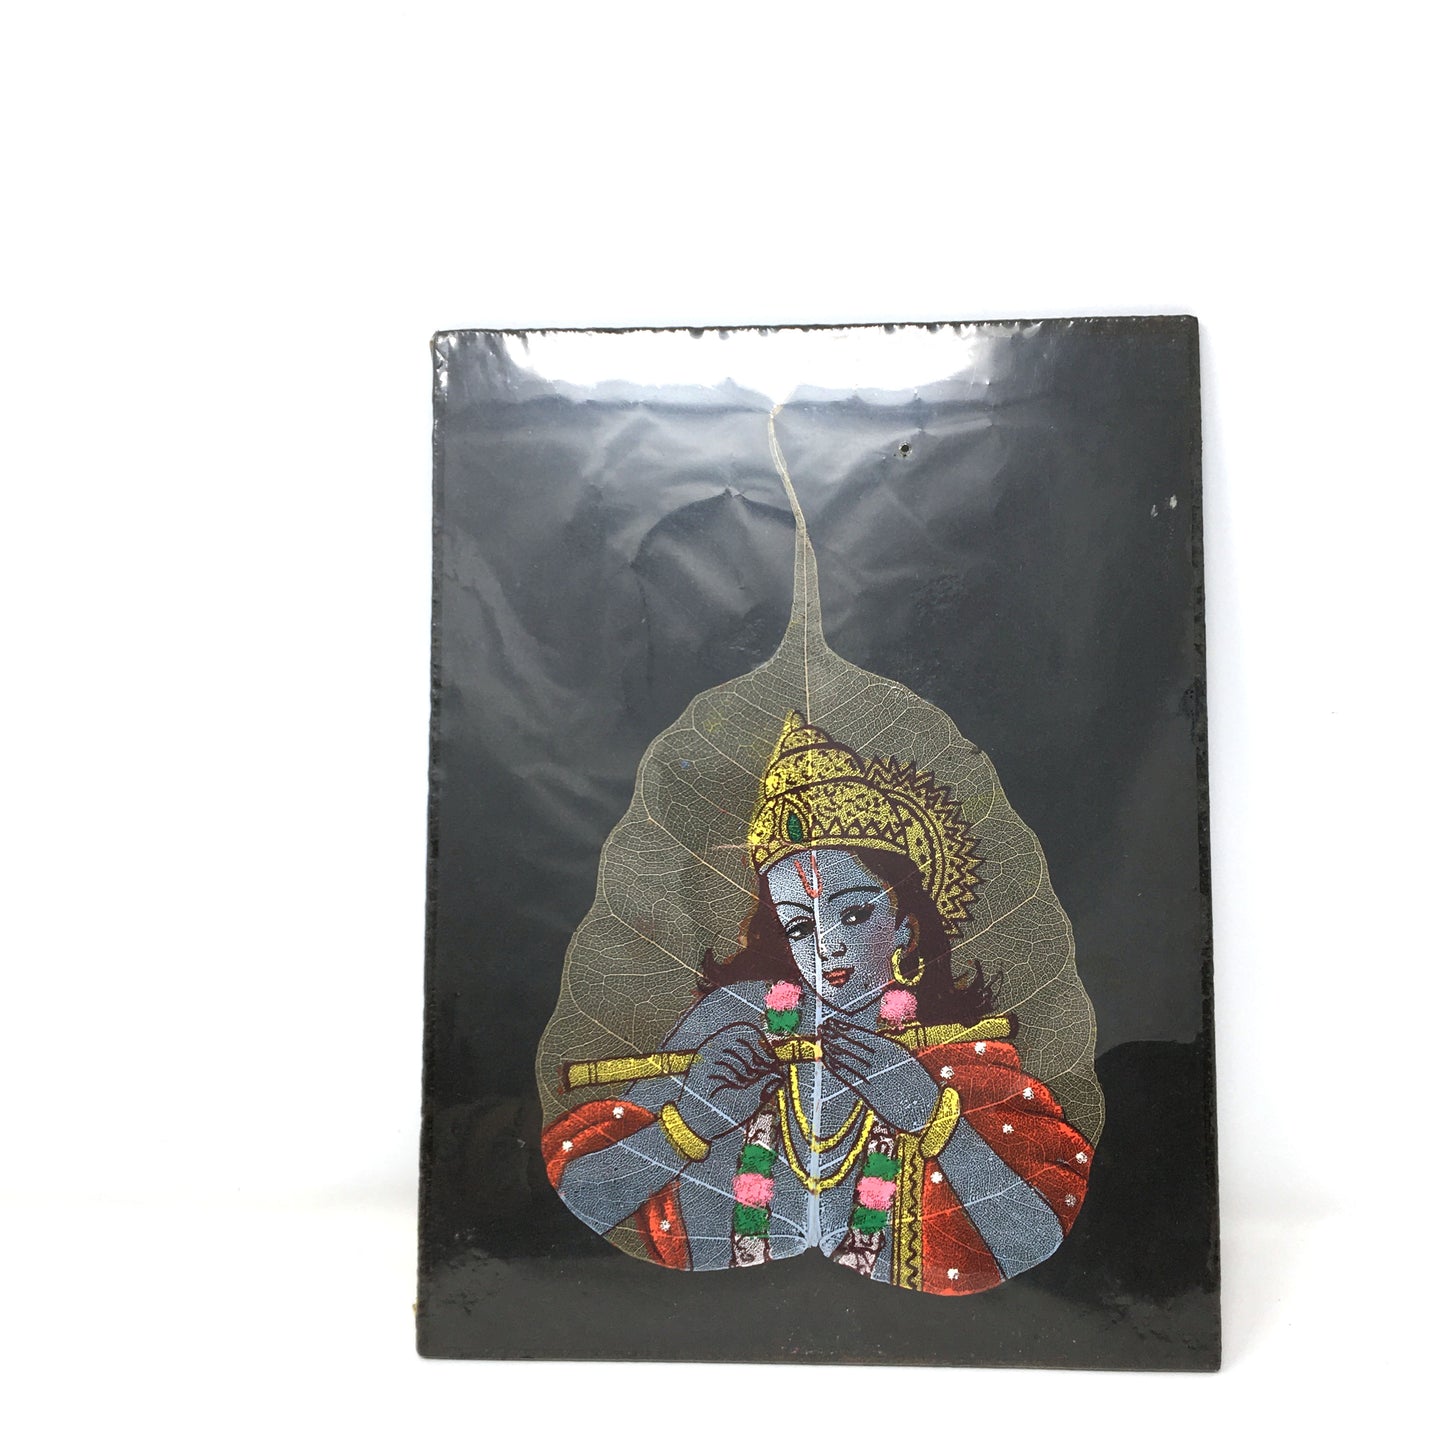 Hand-painted India God Lord Krishna Playing Divine Flute Painted on Real Dry Lea